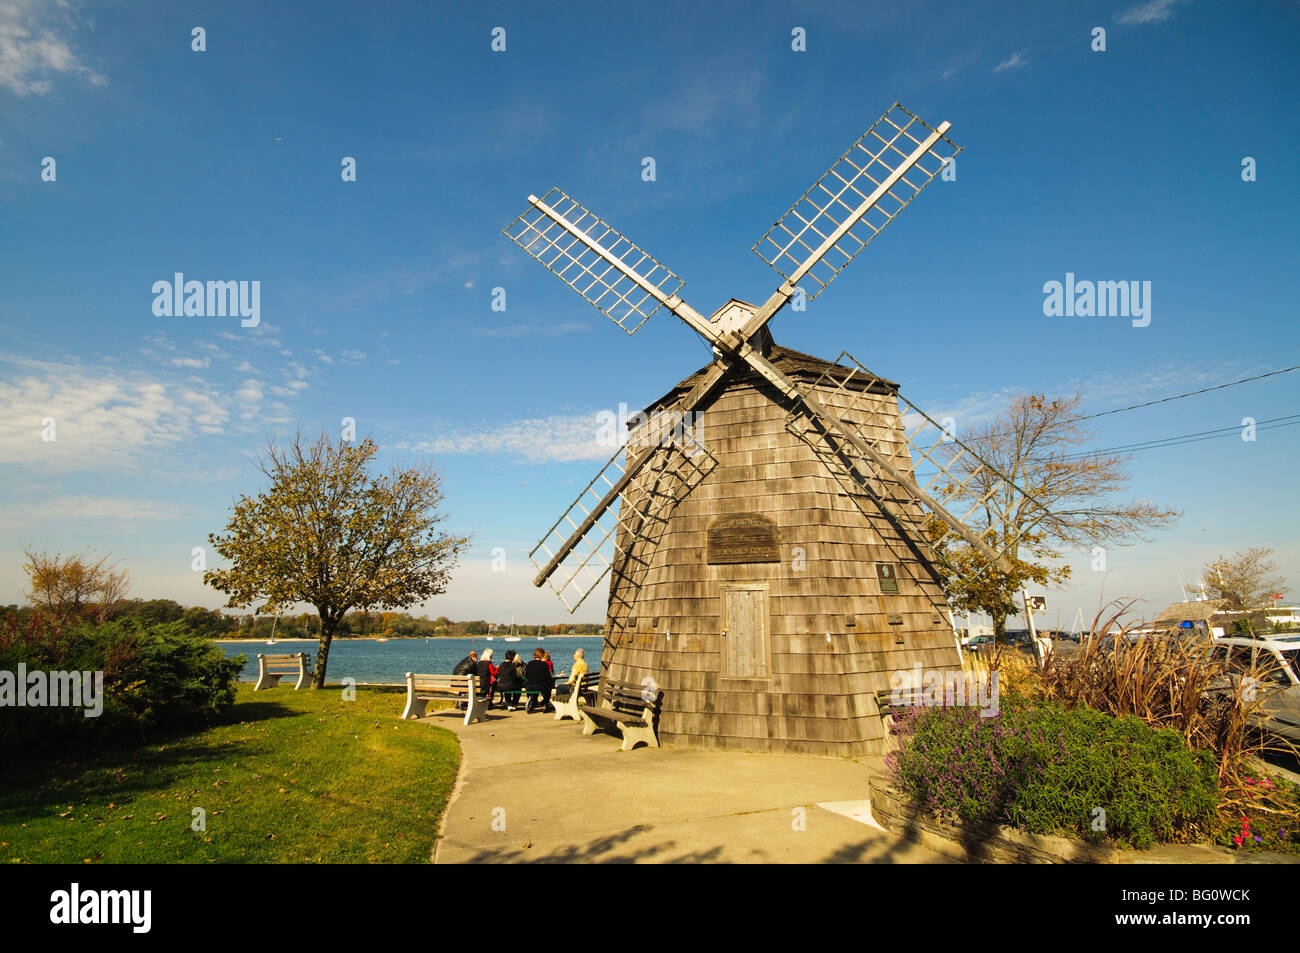 Model of Beebe windmill, Sag Harbor, The Hamptons, Long Island, New York State, United States of America, North America Stock Photo